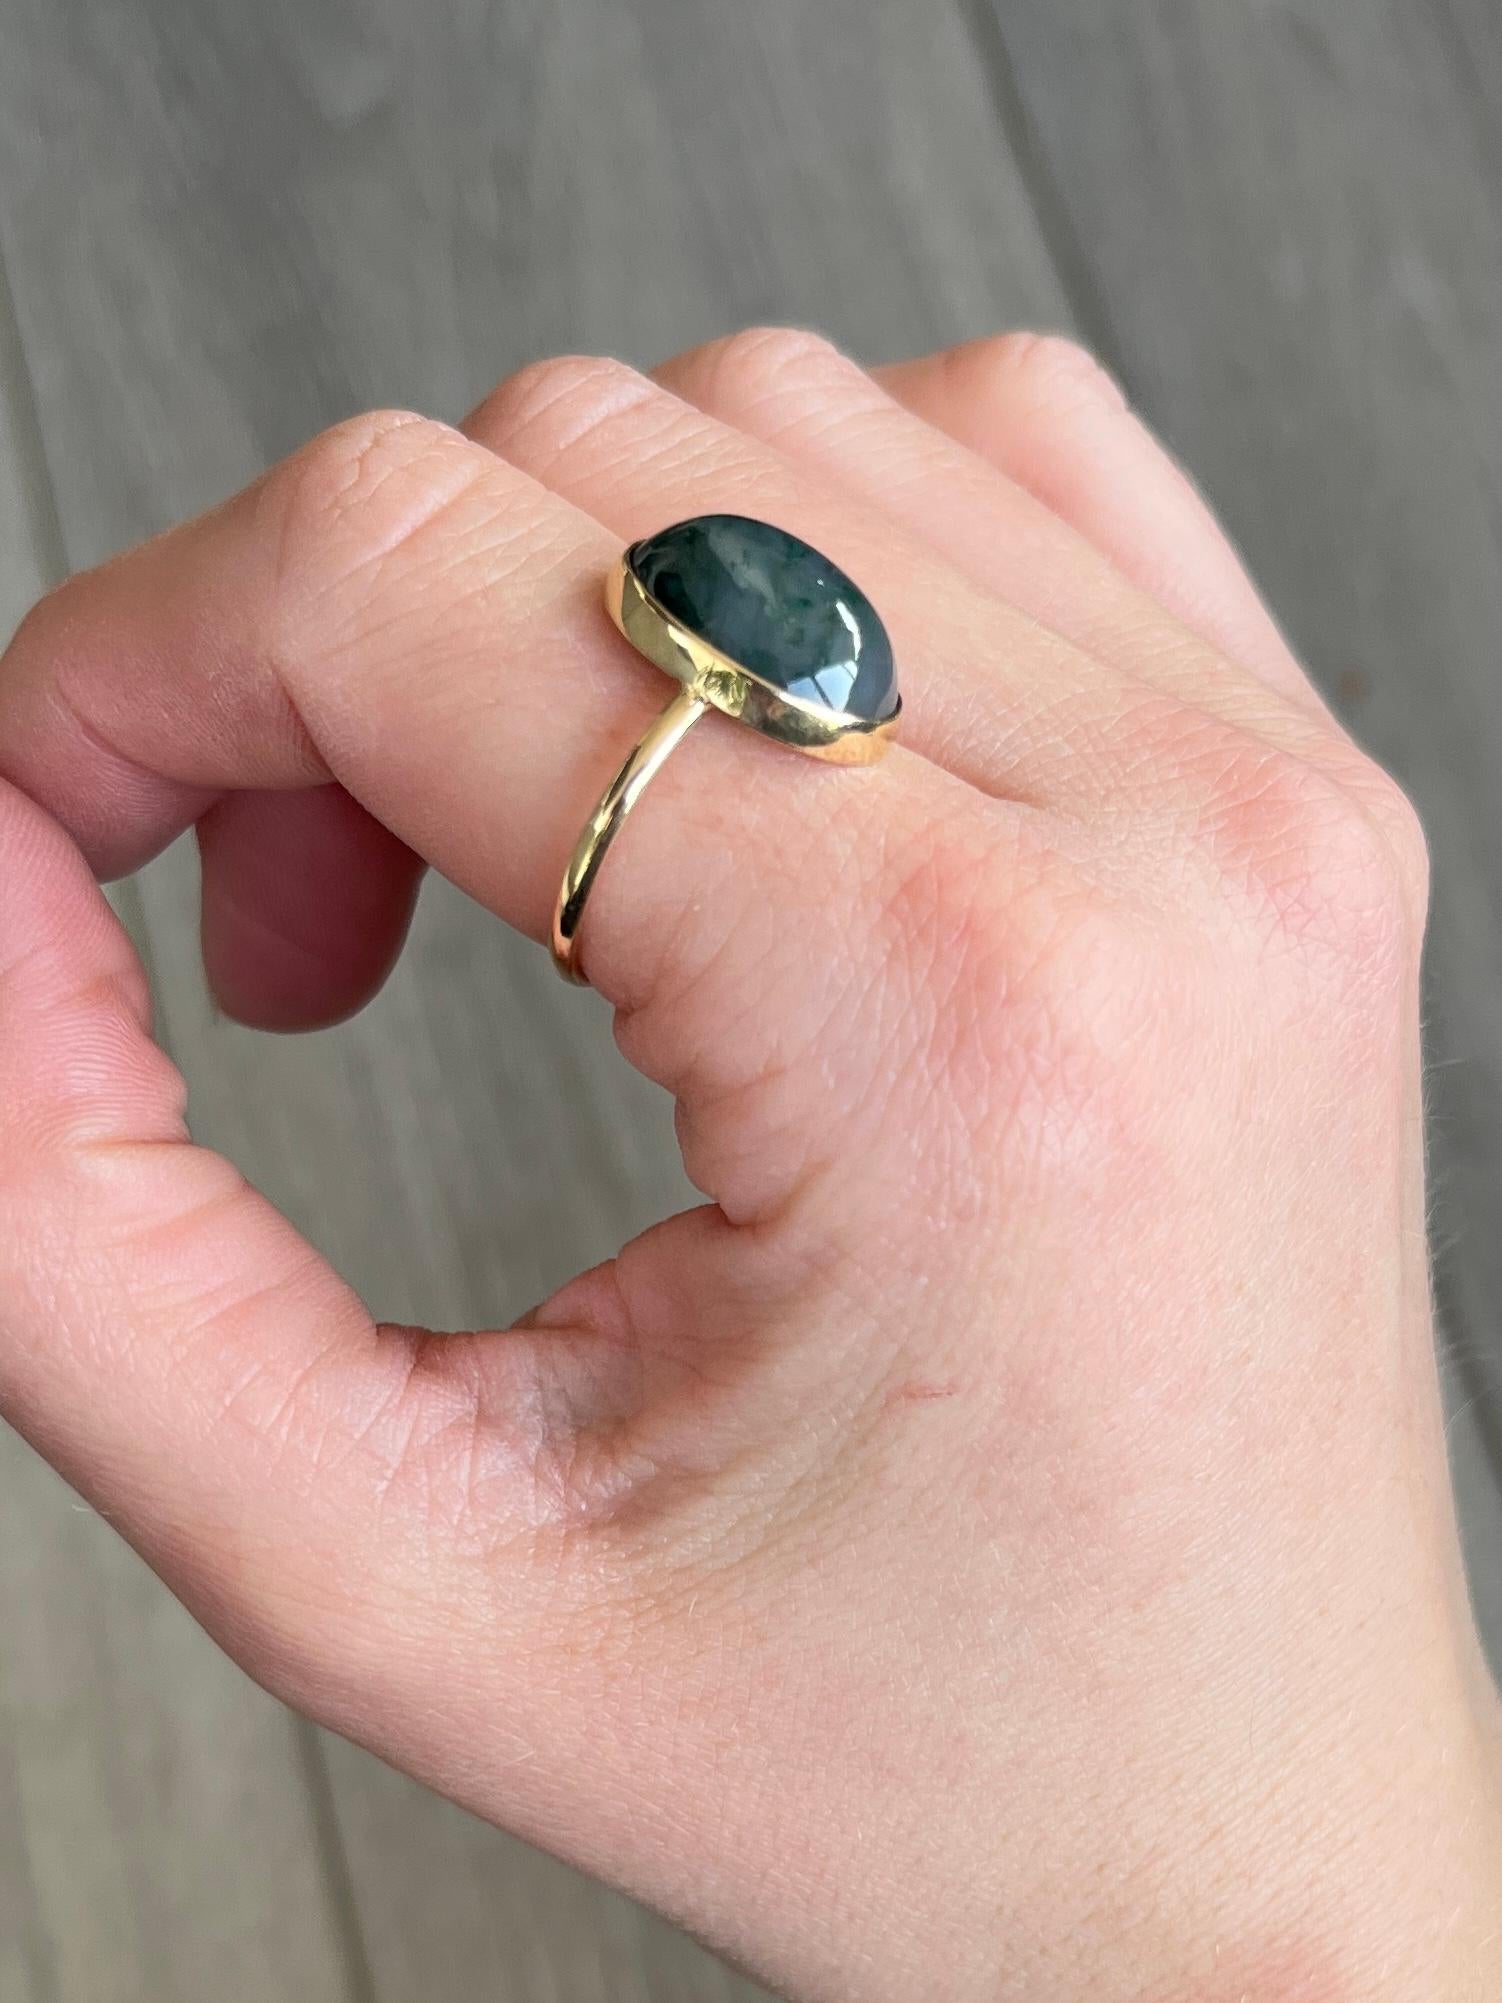 This wonderful moss agate stone has marbling of deep green running through. Surrounding the stone there is a fine gold frame and a simple band. Modelled in 9carat gold. Fully hallmarked Birmingham 1966. 

Size: T or 9 1/2 
Stone Dimensions: 15x11mm